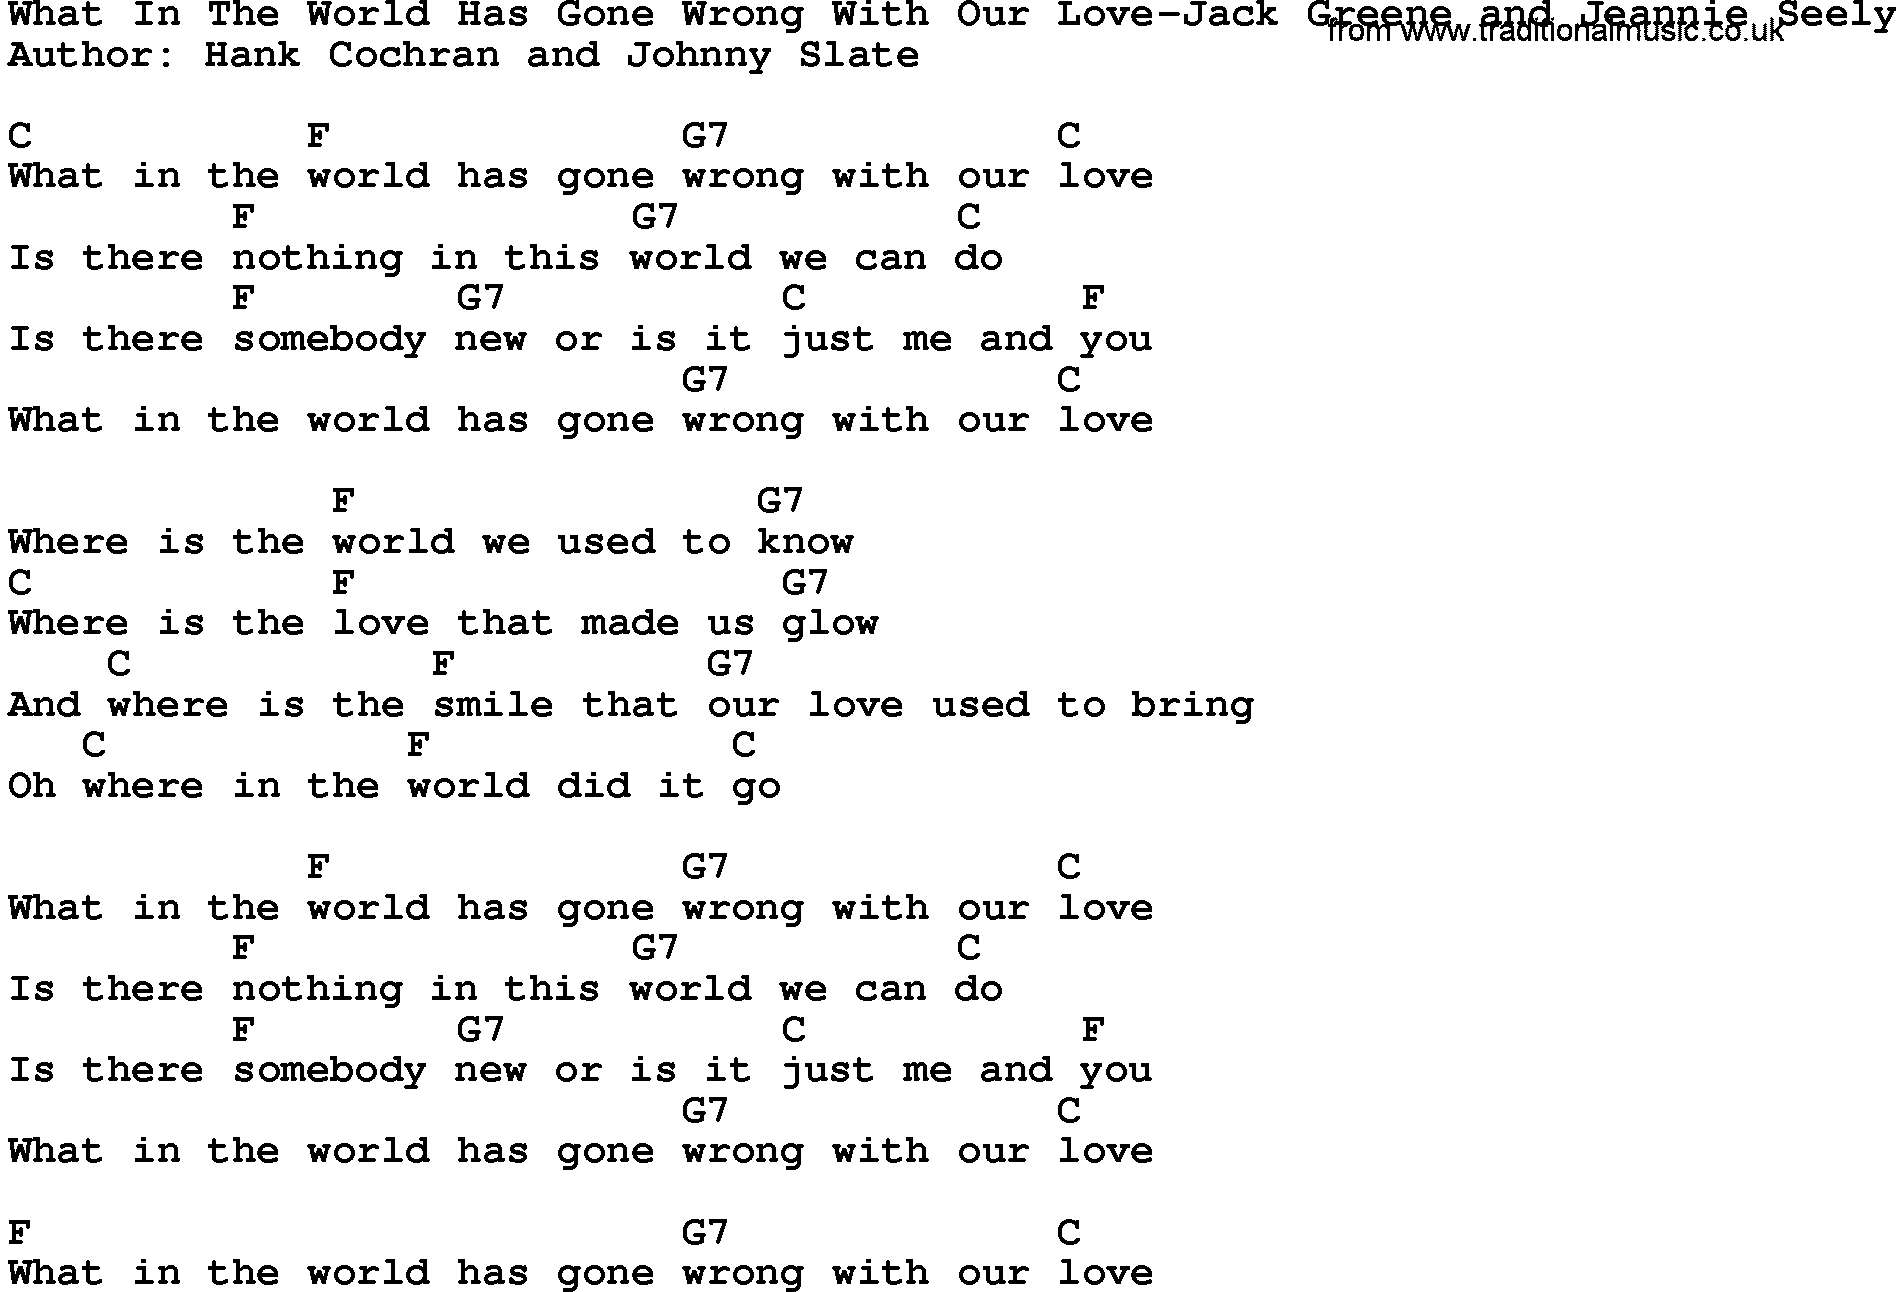 Country music song: What In The World Has Gone Wrong With Our Love-Jack Greene And Jeannie Seely lyrics and chords